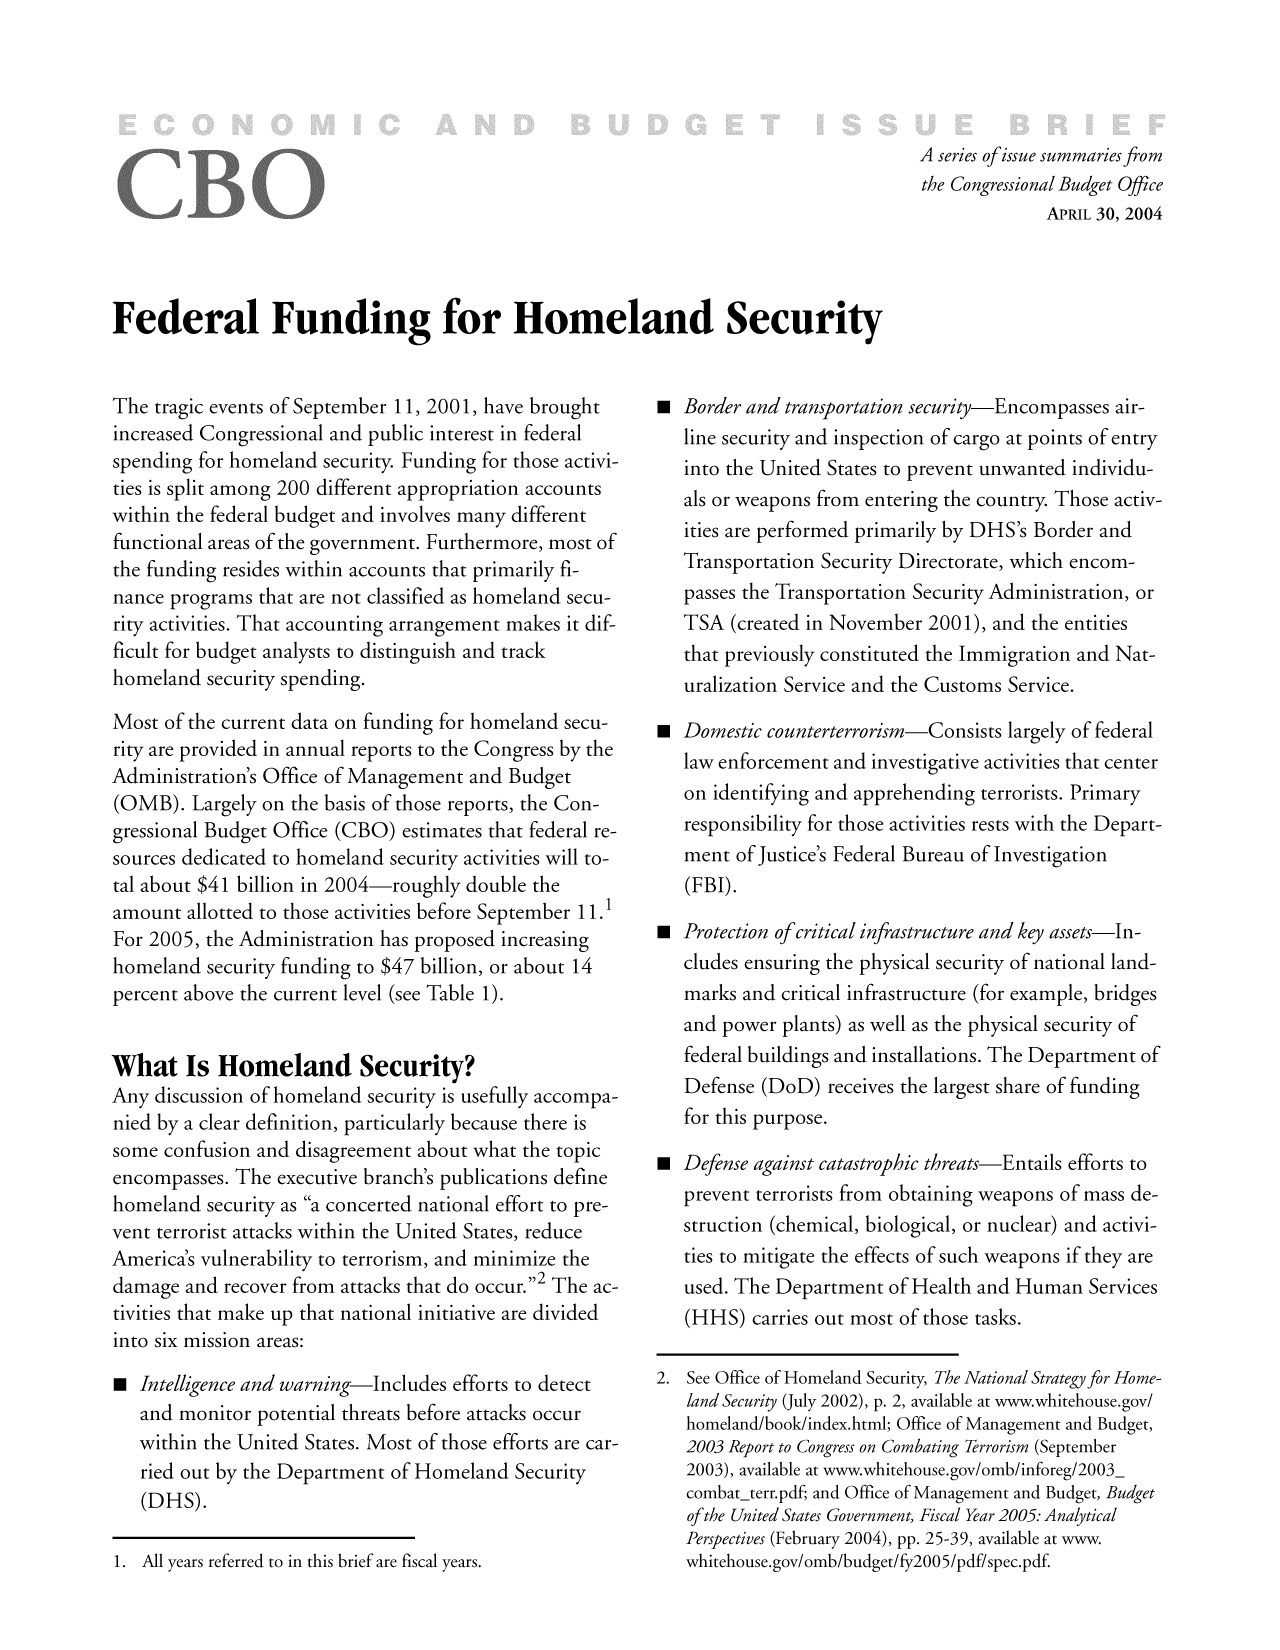 handle is hein.congrec/cbo8315 and id is 1 raw text is: A series of issue summaries from
the Congressional Budget Office
APRIL 30, 2004

Federal Funding for Homeland Security

The tragic events of September 11, 2001, have brought
increased Congressional and public interest in federal
spending for homeland security. Funding for those activi-
ties is split among 200 different appropriation accounts
within the federal budget and involves many different
functional areas of the government. Furthermore, most of
the funding resides within accounts that primarily fi-
nance programs that are not classified as homeland secu-
rity activities. That accounting arrangement makes it dif-
ficult for budget analysts to distinguish and track
homeland security spending.
Most of the current data on funding for homeland secu-
rity are provided in annual reports to the Congress by the
Administration's Office of Management and Budget
(0MB). Largely on the basis of those reports, the Con-
gressional Budget Office (CBO) estimates that federal re-
sources dedicated to homeland security activities will to-
tal about $41 billion in 2004 roughly double the
amount allotted to those activities before September 11.1
For 2005, the Administration has proposed increasing
homeland security funding to $47 billion, or about 14
percent above the current level (see Table 1).
What Is Homeland Security?
Any discussion of homeland security is usefully accompa-
nied by a clear definition, particularly because there is
some confusion and disagreement about what the topic
encompasses. The executive branch's publications define
homeland security as a concerted national effort to pre-
vent terrorist attacks within the United States, reduce
America's vulnerability to terrorism, and minimize the
damage and recover from attacks that do occuri2 The ac-
tivities that make up that national initiative are divided
into six mission areas:
0 Intelligence and warning-Includes efforts to detect
and monitor potential threats before attacks occur
within the United States. Most of those efforts are car-
ried out by the Department of Homeland Security
(DHS).

1. All years referred to in this brief are fiscal years.

 Border and transportation security-Encompasses air-
line security and inspection of cargo at points of entry
into the United States to prevent unwanted individu-
als or weapons from entering the country. Those activ-
ities are performed primarily by DHS's Border and
Transportation Security Directorate, which encom-
passes the Transportation Security Administration, or
TSA (created in November 200 1), and the entities
that previously constituted the Immigration and Nat-
uralization Service and the Customs Service.
  Domestic counterterrorism-Consists largely of federal
law enforcement and investigative activities that center
on identifying and apprehending terrorists. Primary
responsibility for those activities rests with the Depart-
ment of Justice's Federal Bureau of Investigation
(FBI).
  Protection of critical infrastructure and key assets-In-
cludes ensuring the physical security of national land-
marks and critical infrastructure (for example, bridges
and power plants) as well as the physical security of
federal buildings and installations. The Department of
Defense (DoD) receives the largest share of funding
for this purpose.
  Defense against catastrophic threats-Entails efforts to
prevent terrorists from obtaining weapons of mass de-
struction (chemical, biological, or nuclear) and activi-
ties to mitigate the effects of such weapons if they are
used. The Department of Health and Human Services
(HHS) carries out most of those tasks.
2. See Office of Homeland Security, The National Strategy for Home-
land Security (July 2002), p. 2, available at www.whitehouse.gov/
homeland/book/index.html; Office of Management and Budget,
2003 Report to Congress on Combating Terrorism (September
2003), available at www.whitehouse.gov/omb/inforeg/2003-
combat terr.pdf; and Office of Management and Budget, Budget


